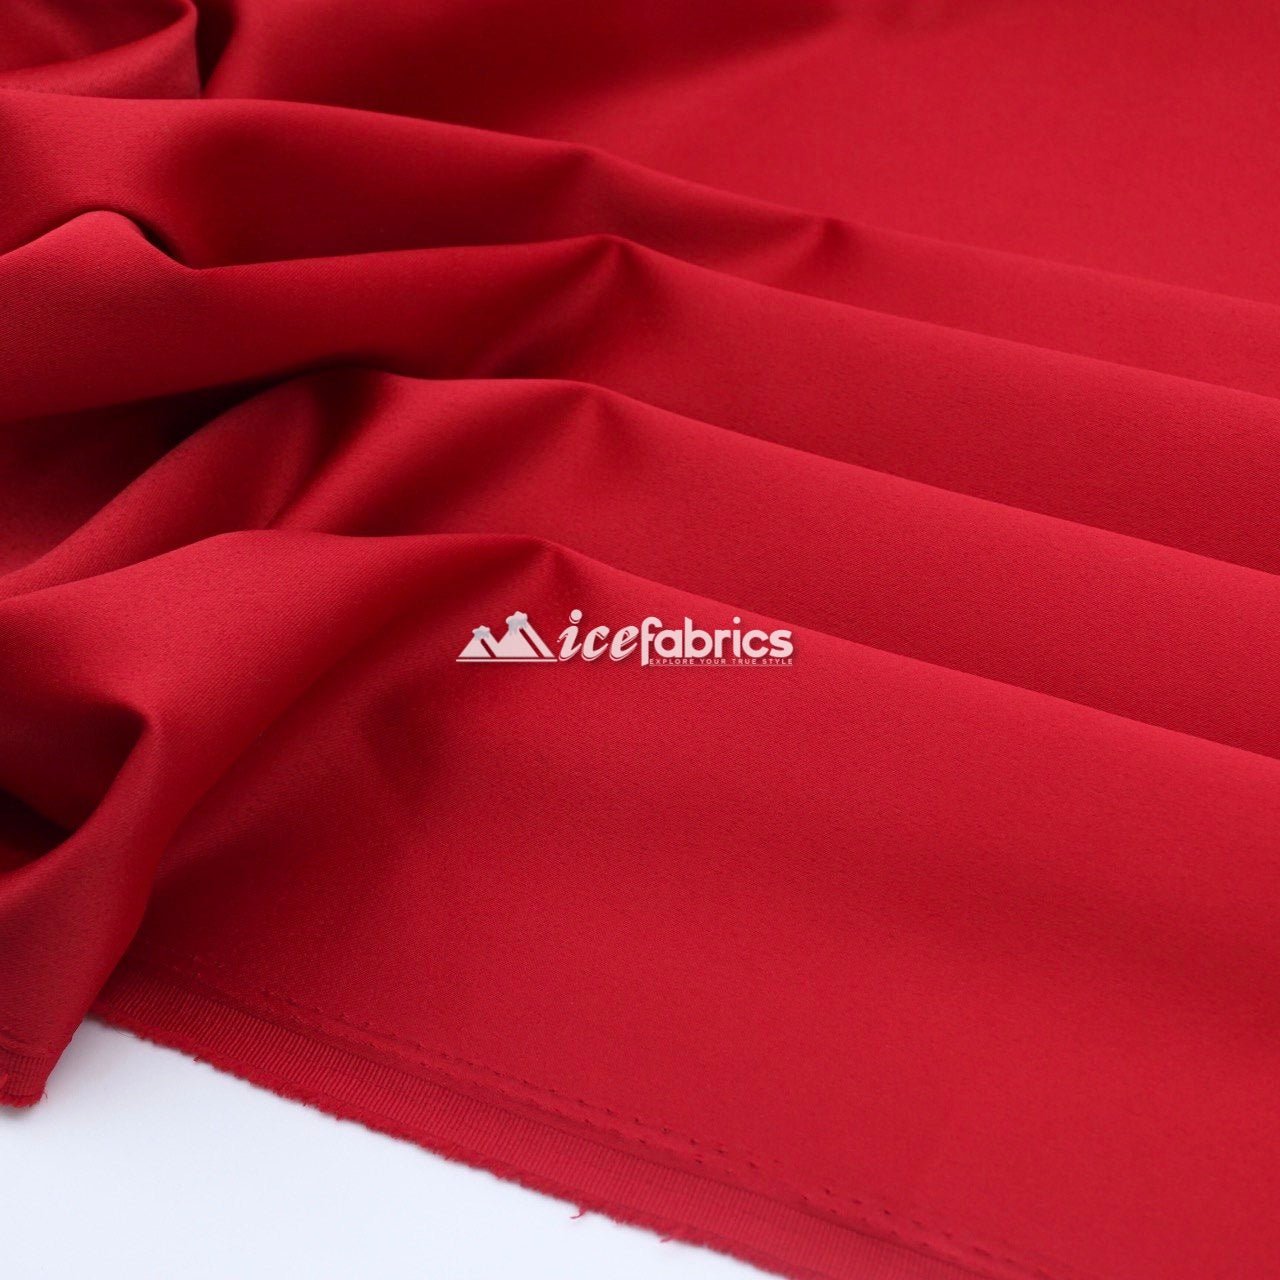 Armani Thick Solid Color Silky Stretch Satin Fabric Sold By The YardSatin FabricICE FABRICSICE FABRICSRedArmani Thick Solid Color Silky Stretch Satin Fabric Sold By The Yard ICE FABRICS Red